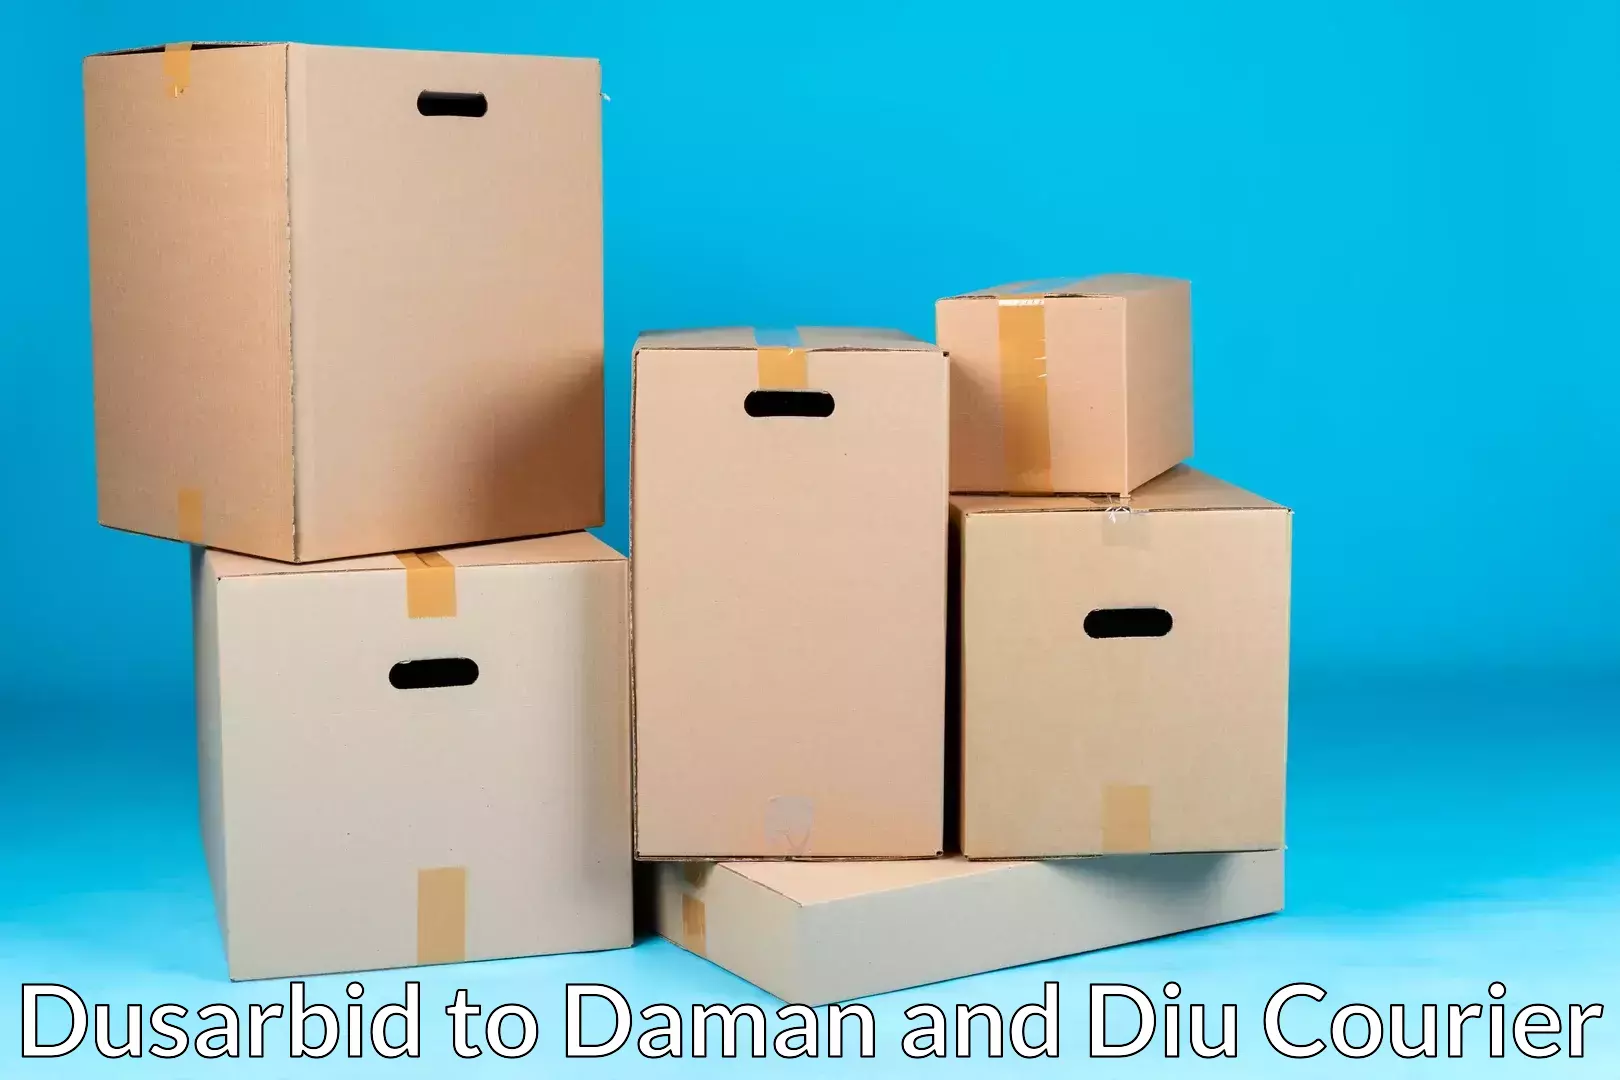 Quality relocation assistance in Dusarbid to Daman